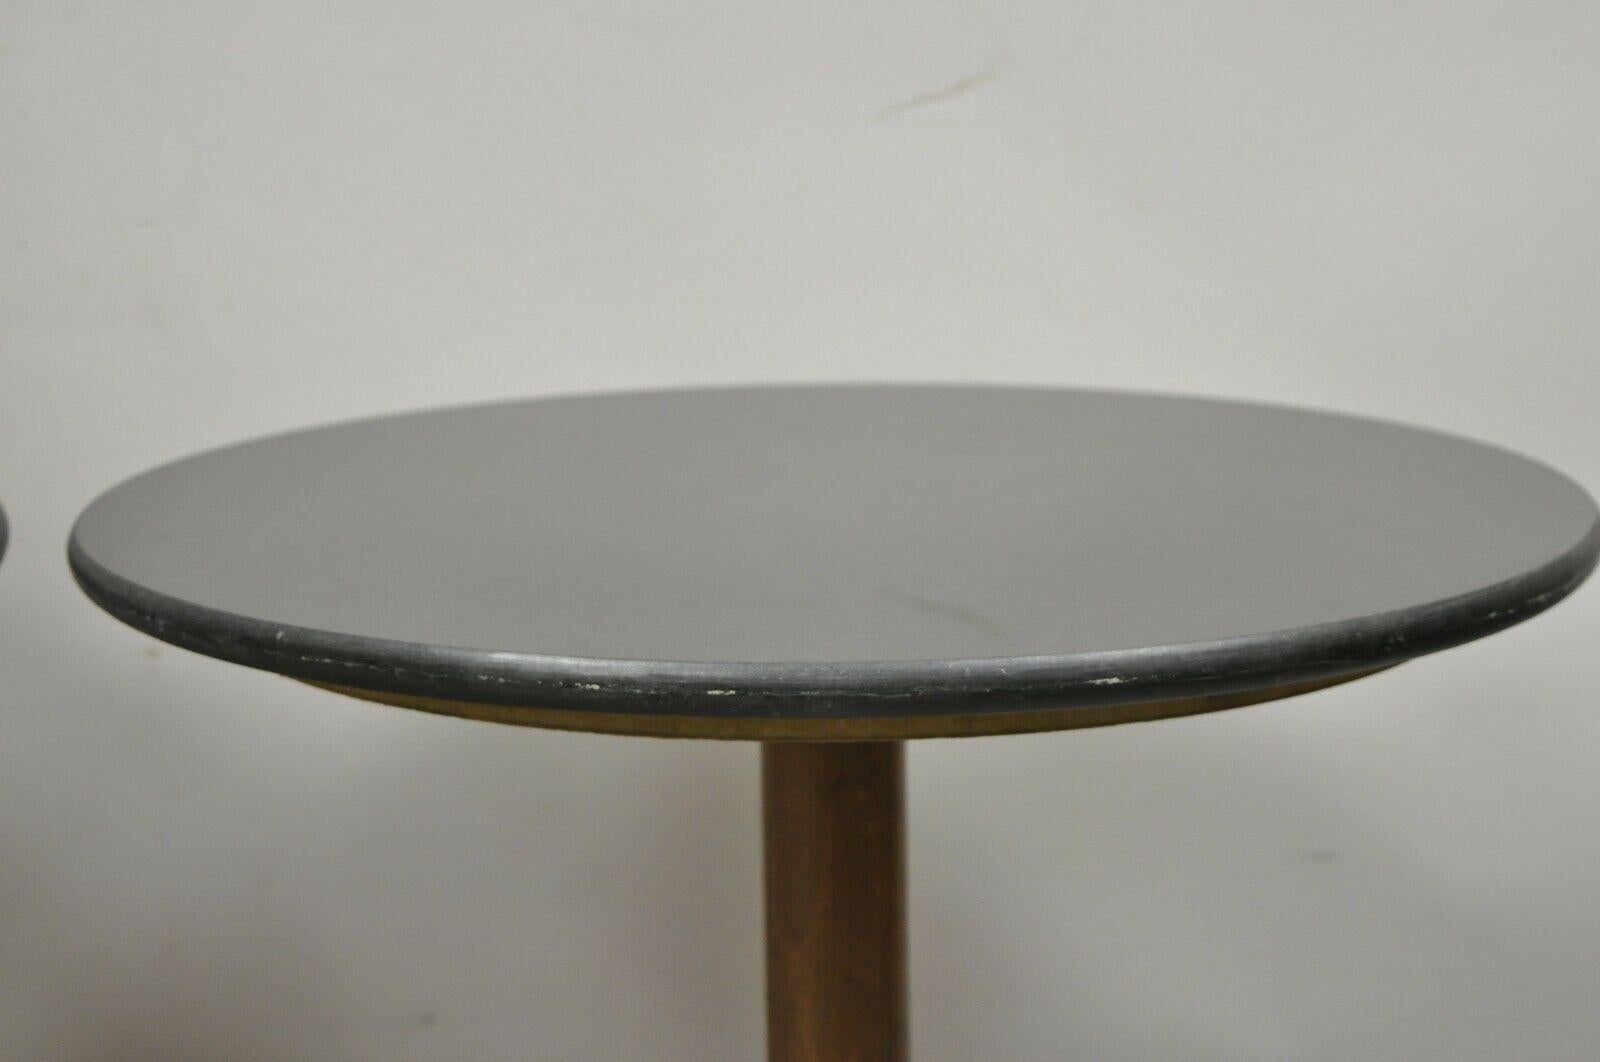 Aluminum Mid Century Modern Round Granite Top Metal Star Base Side Tables - a Pair